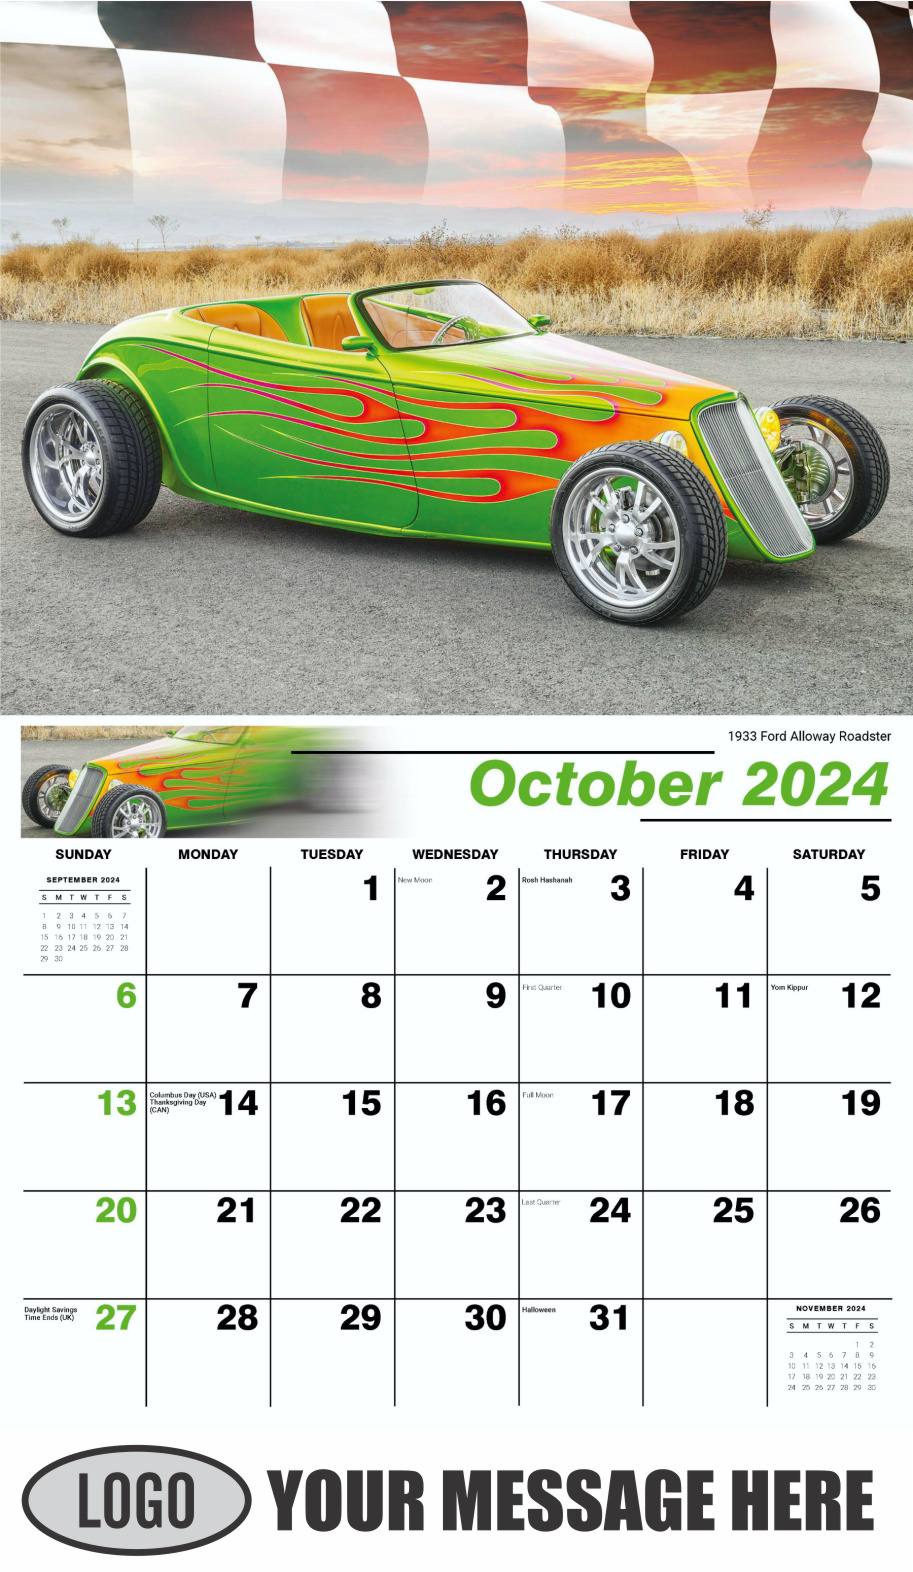 Hot Rods Muscle Cars 2024 Business Promo Calendar low as 65¢